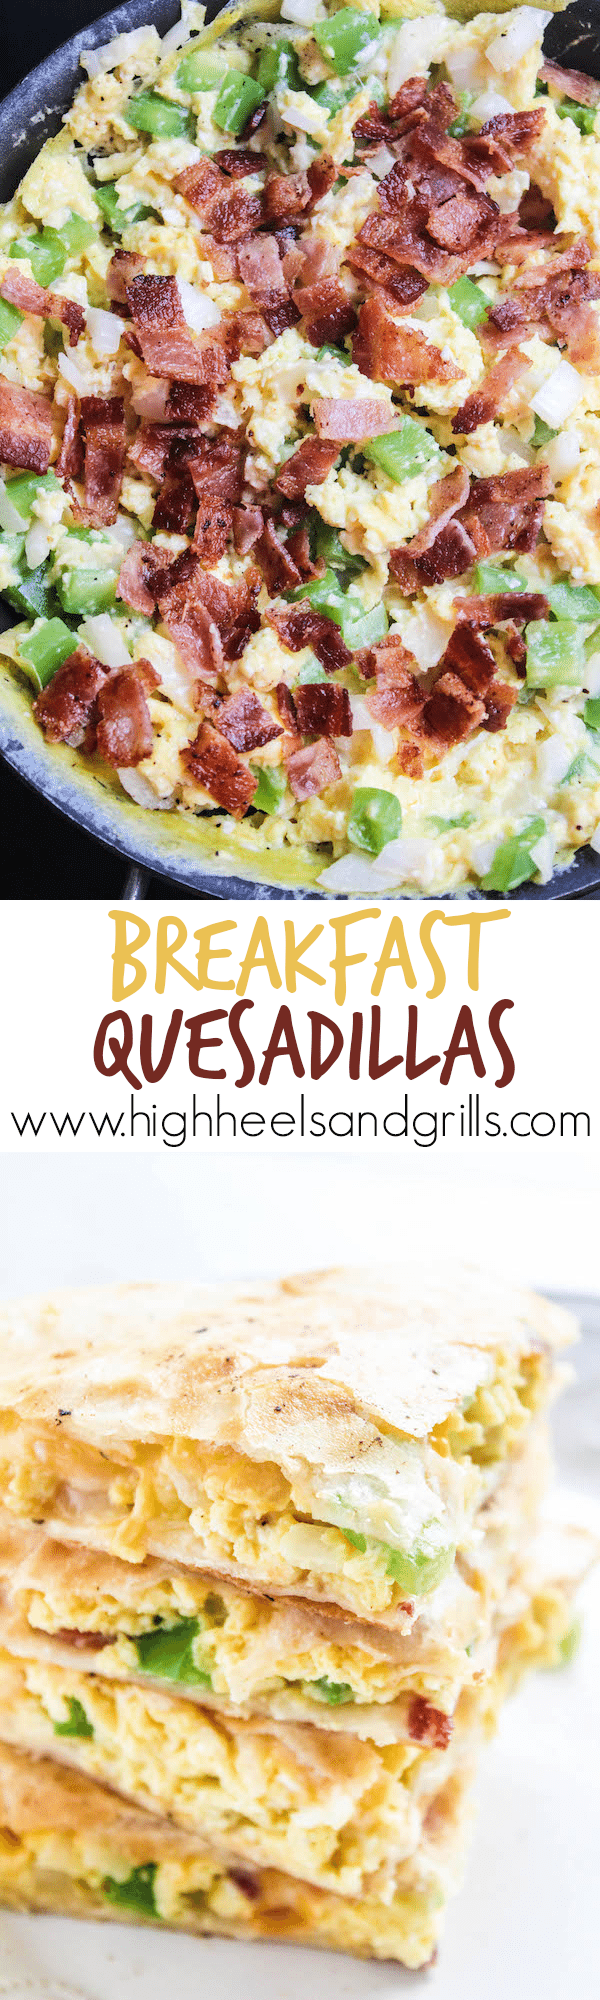 Breakfast Quesadillas - Egg, bacon, peppers, onion, and cheese smothered between two crisp tortillas. Makes for an amazing and quick breakfast!